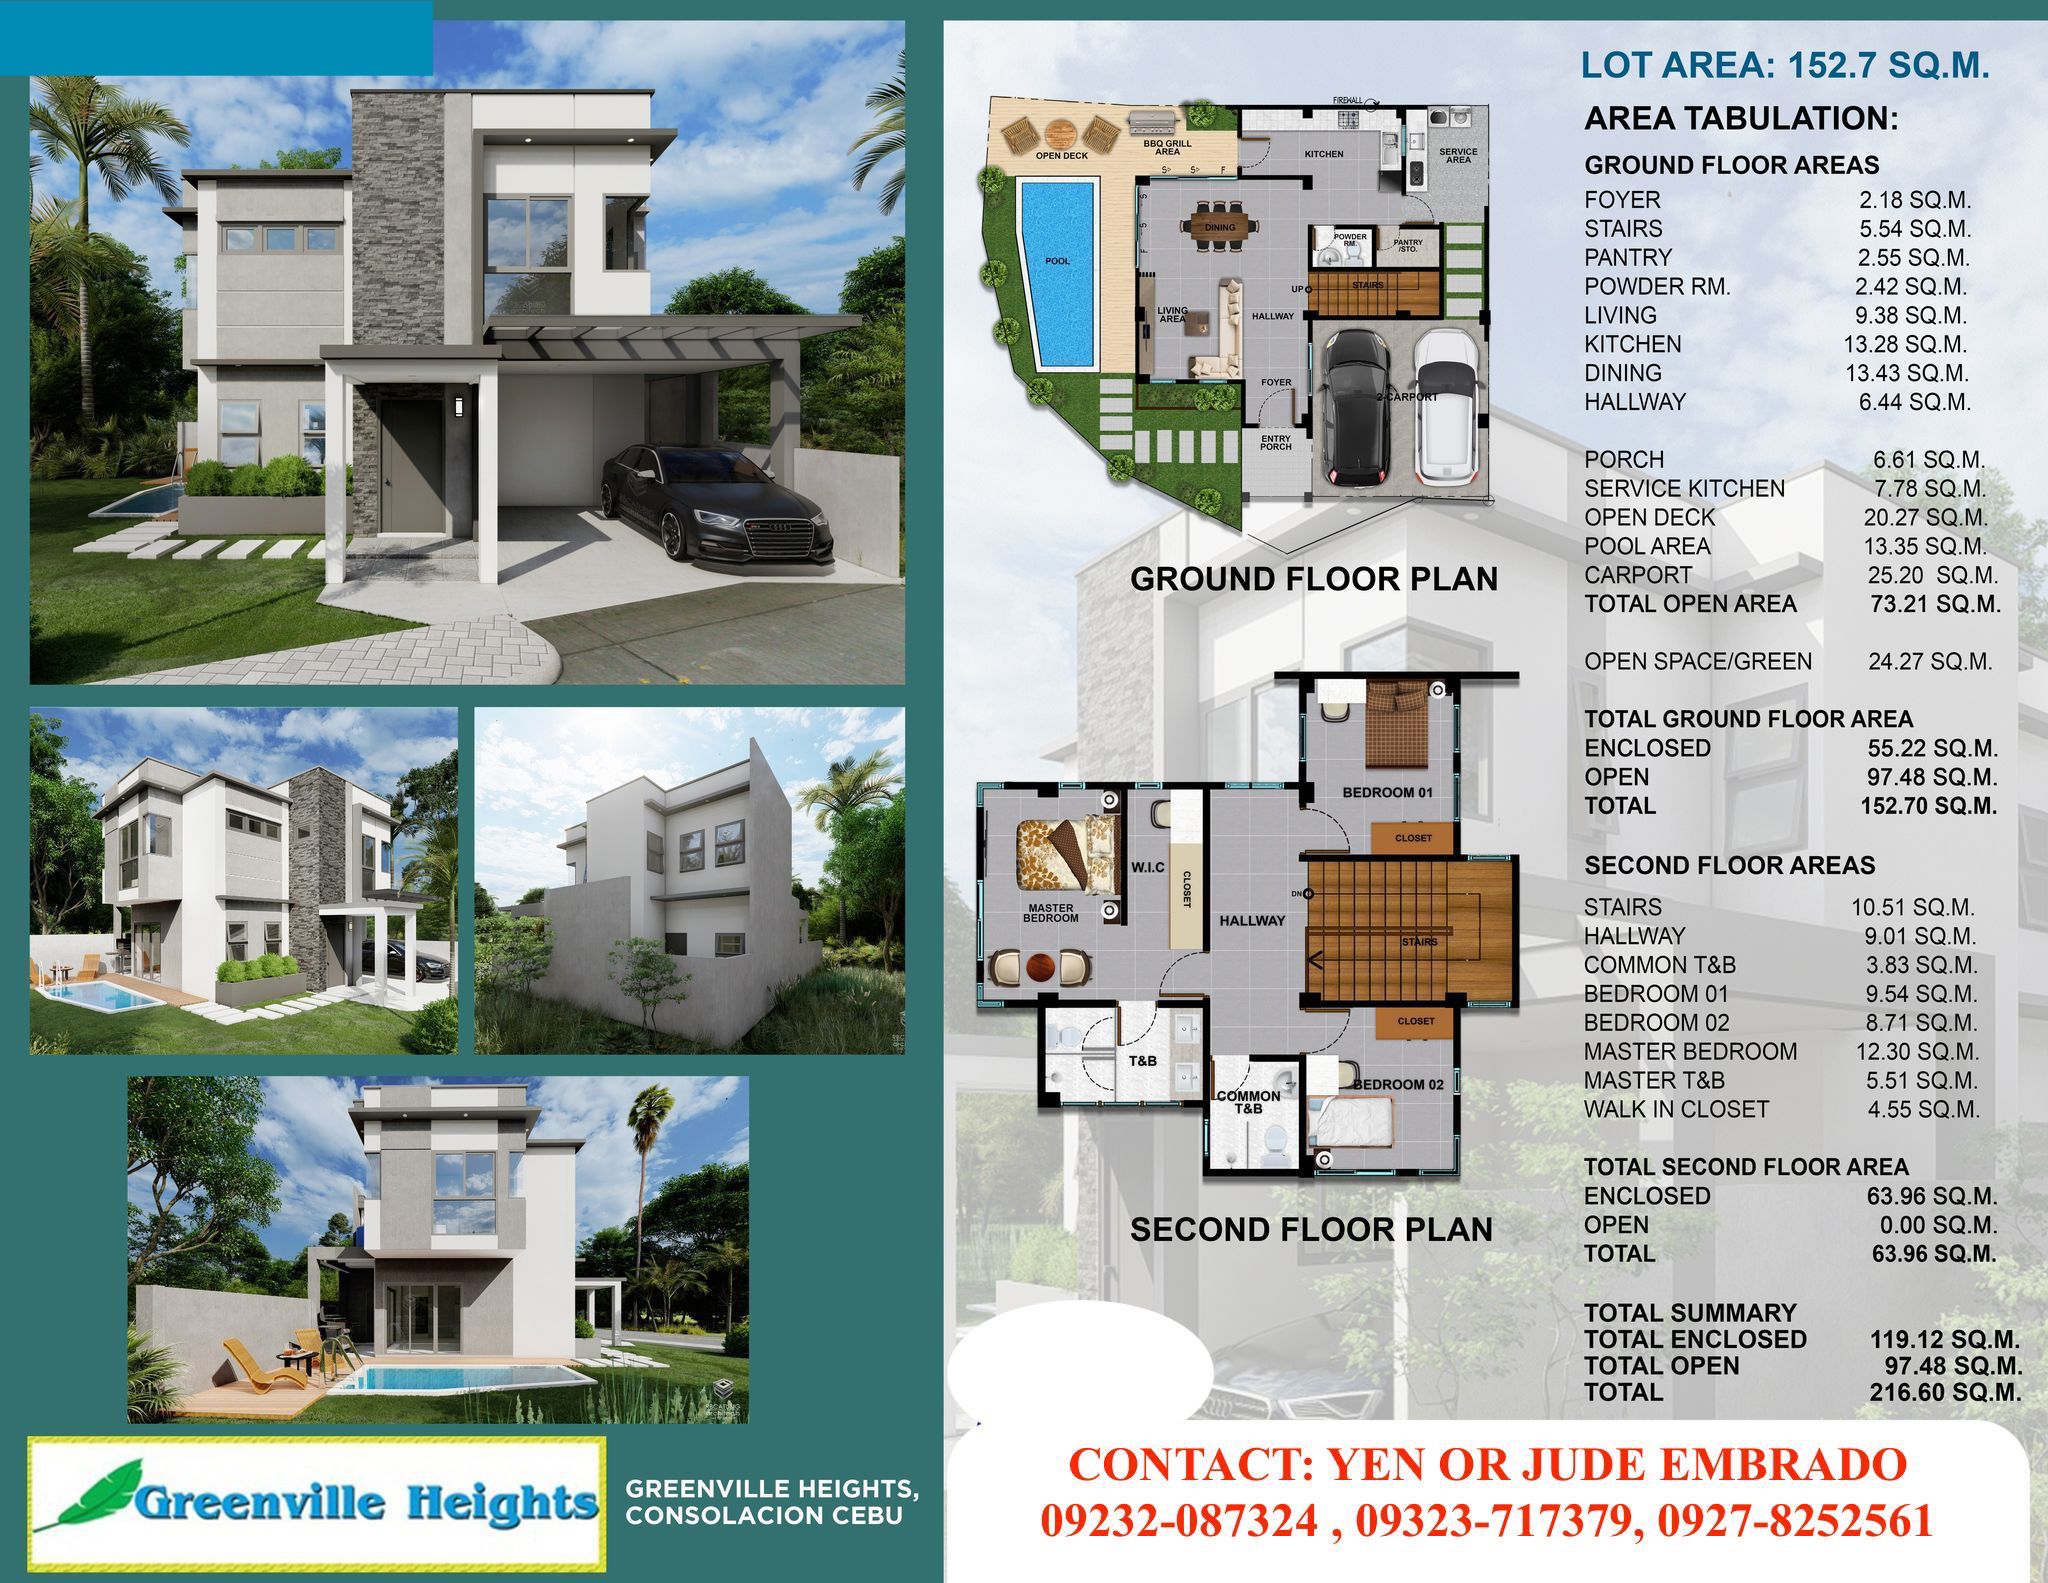 Greenville Heights Consolacion Cebu House For Sale with Pool